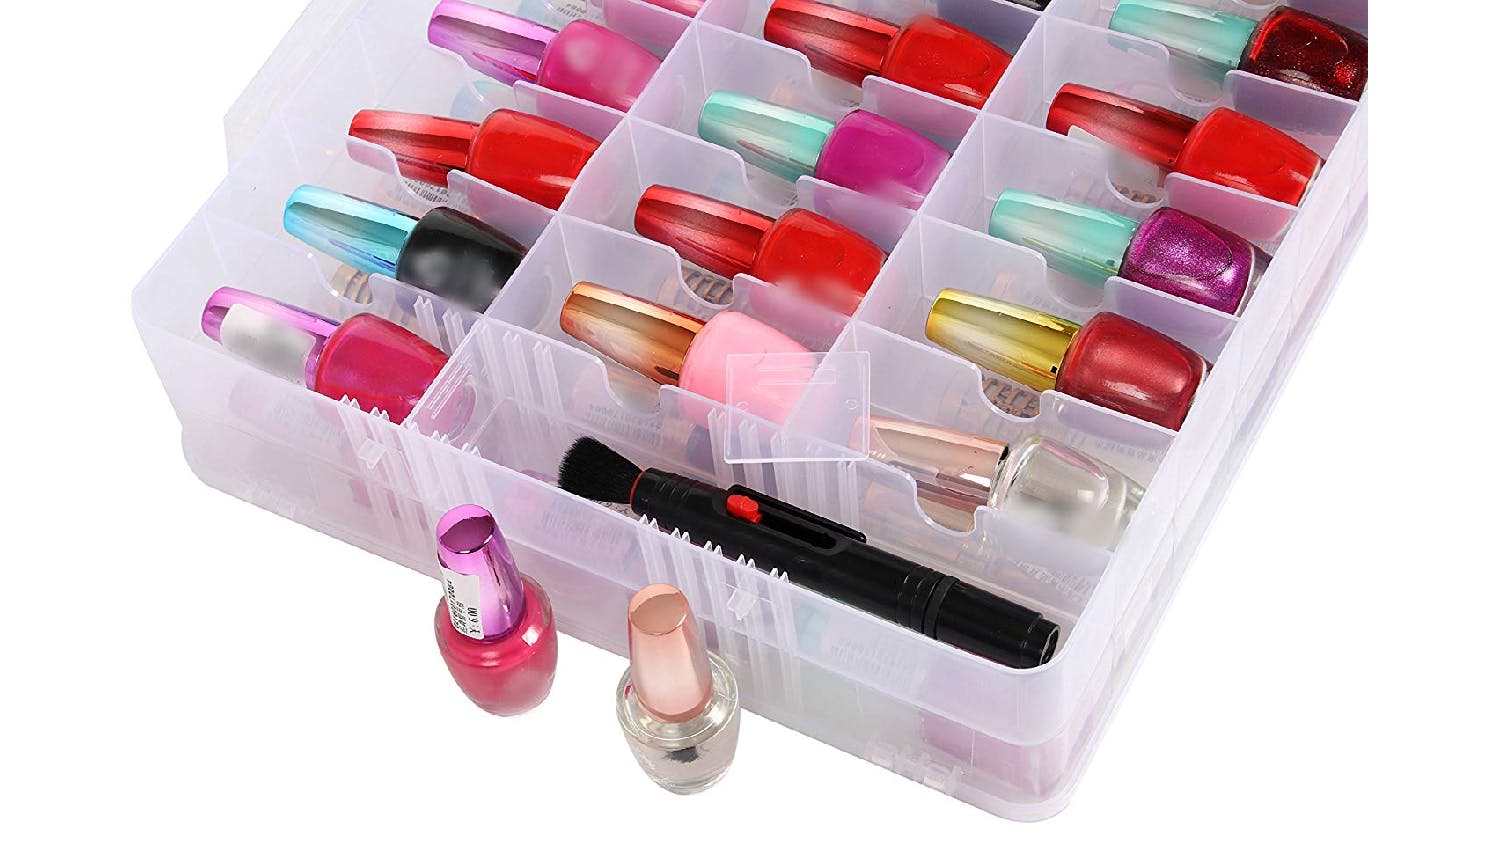 Kmall 48 Compartment Plastic Nail Polish Storage Case with Handle - Clear